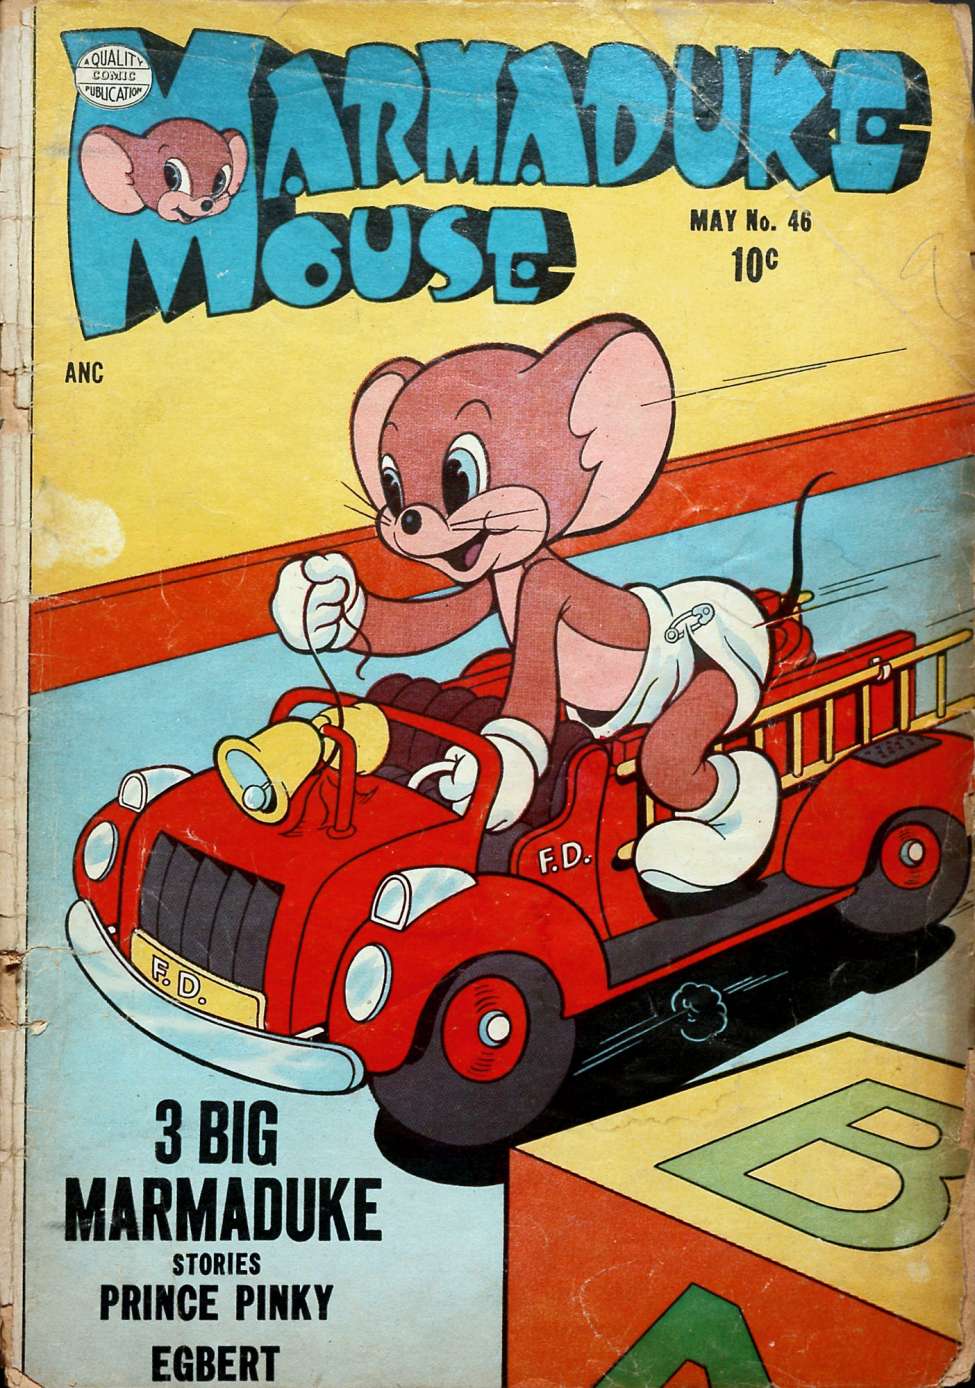 Book Cover For Marmaduke Mouse 46